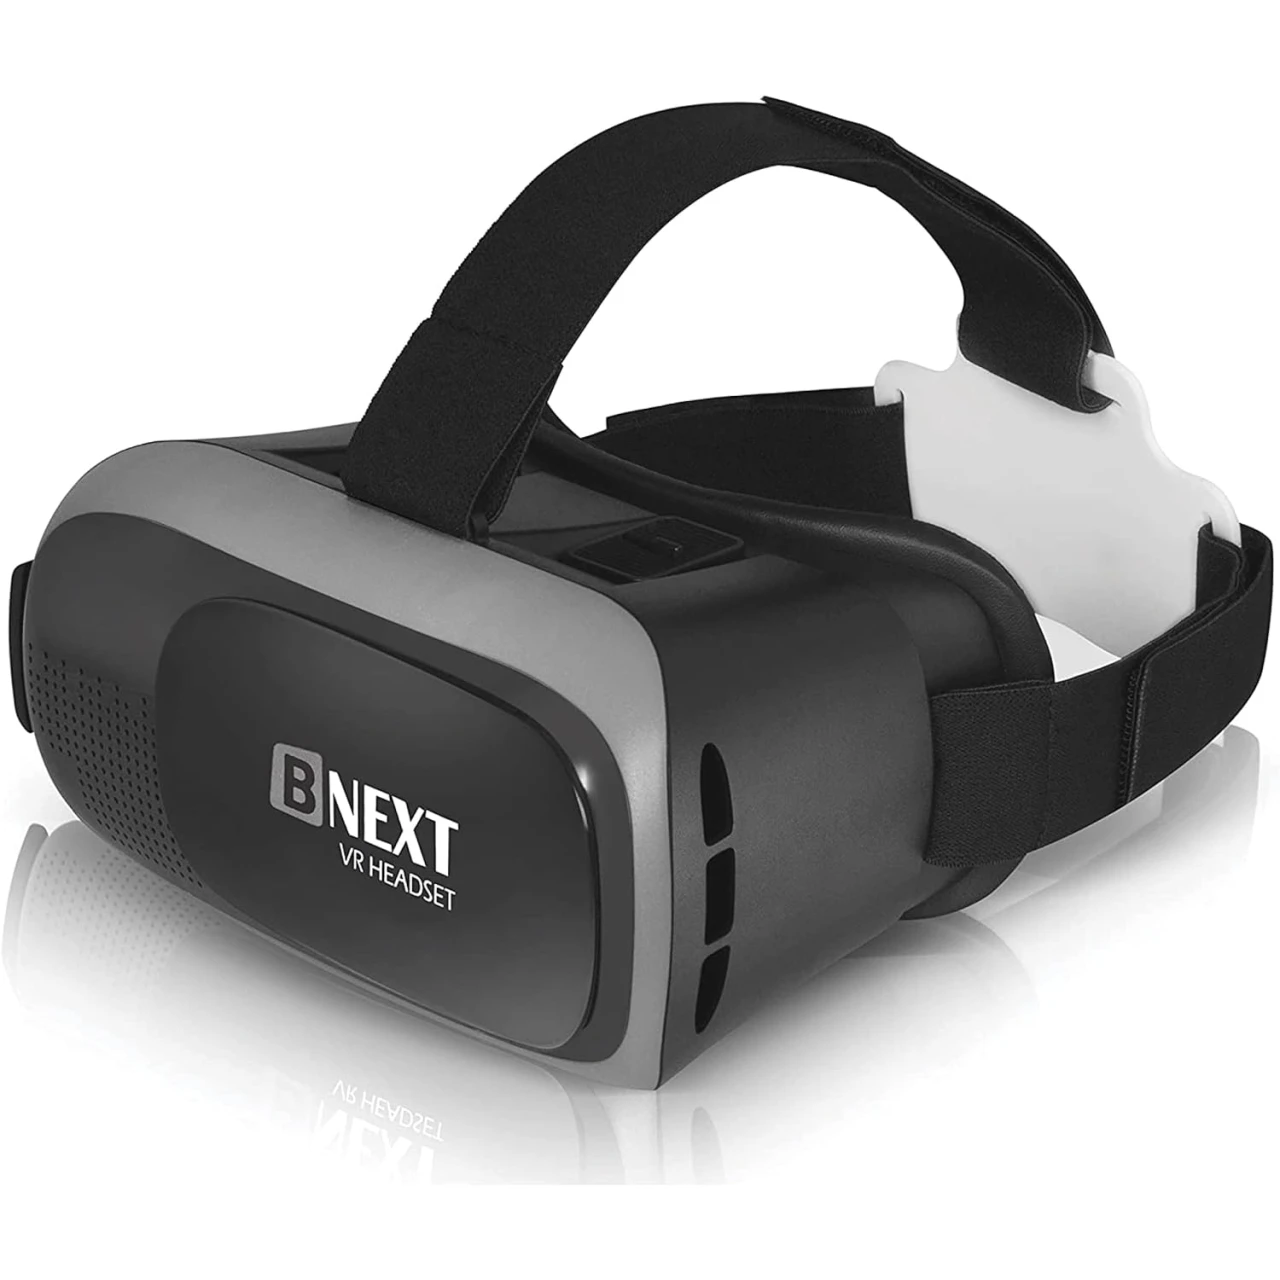 Bnext VR Headset Compatible with iPhone &amp; Android - VR Headsets - Universal Virtual Reality Goggles for Kids&amp;Adults